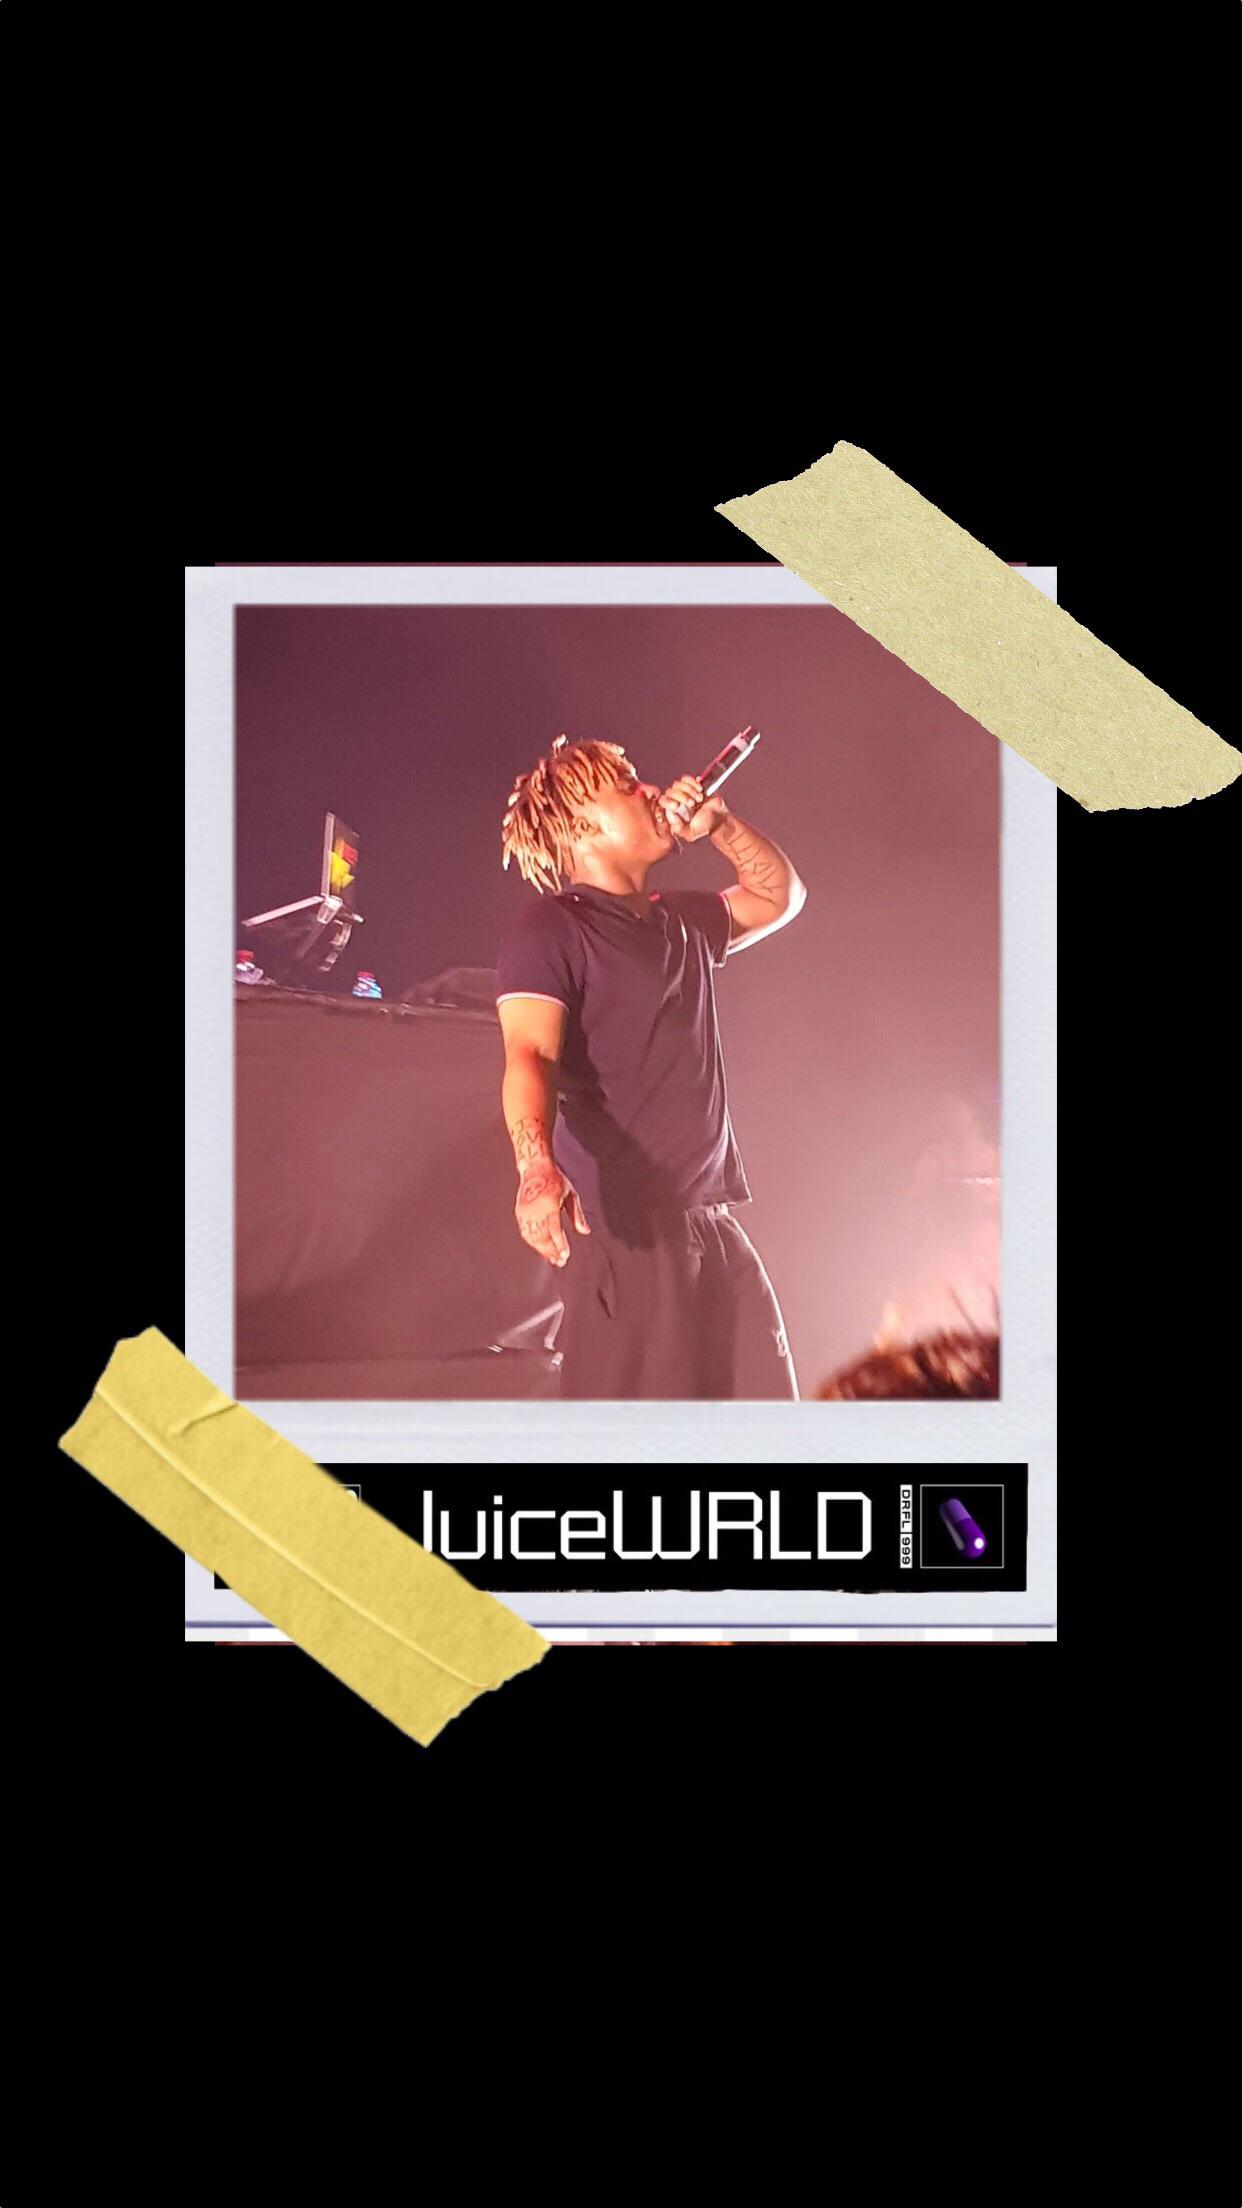 Juice WRLD wallpaper I made for iPhone and Android JuiceWRLD